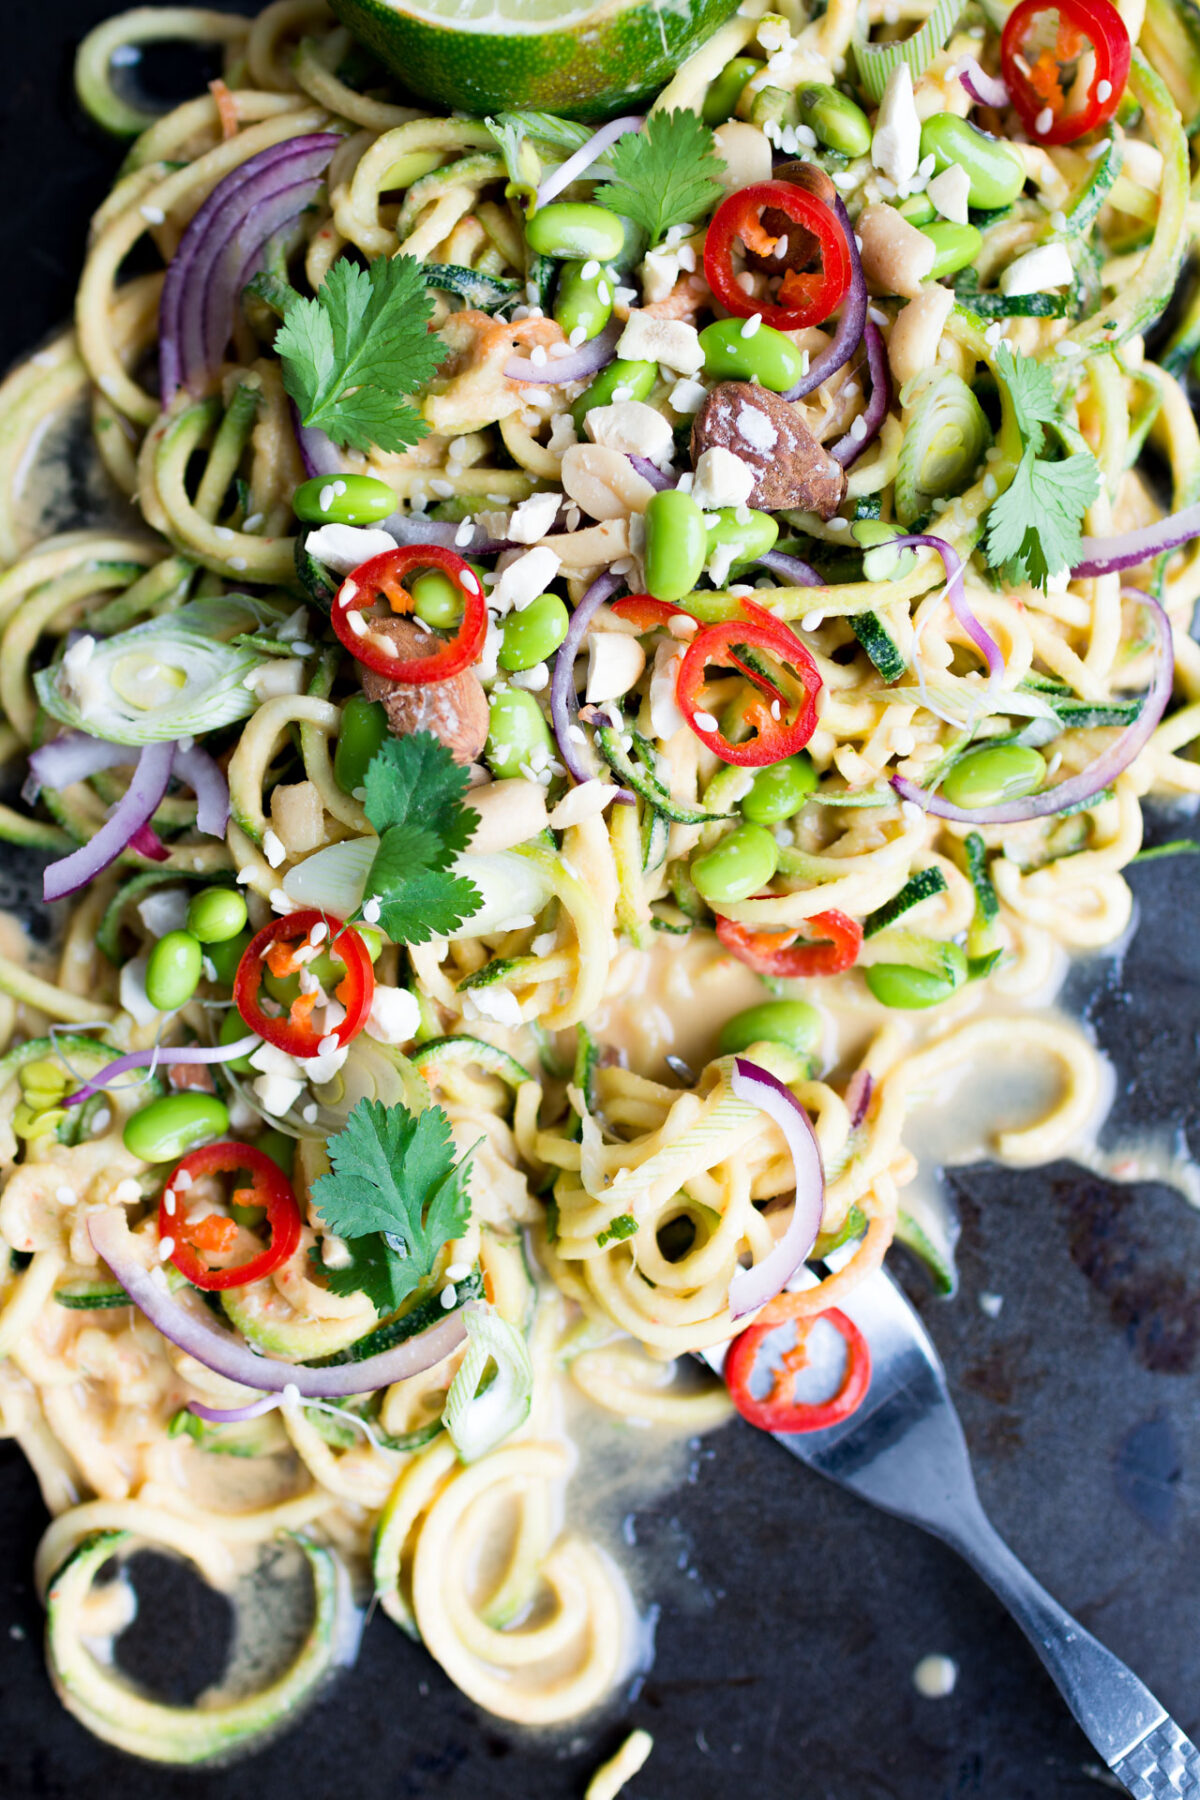 close up view image of a thai zucchini noodle salad top with edamame beans, onions, chopped red chili, peanuts, spring onions, parsley, and sesame seeds